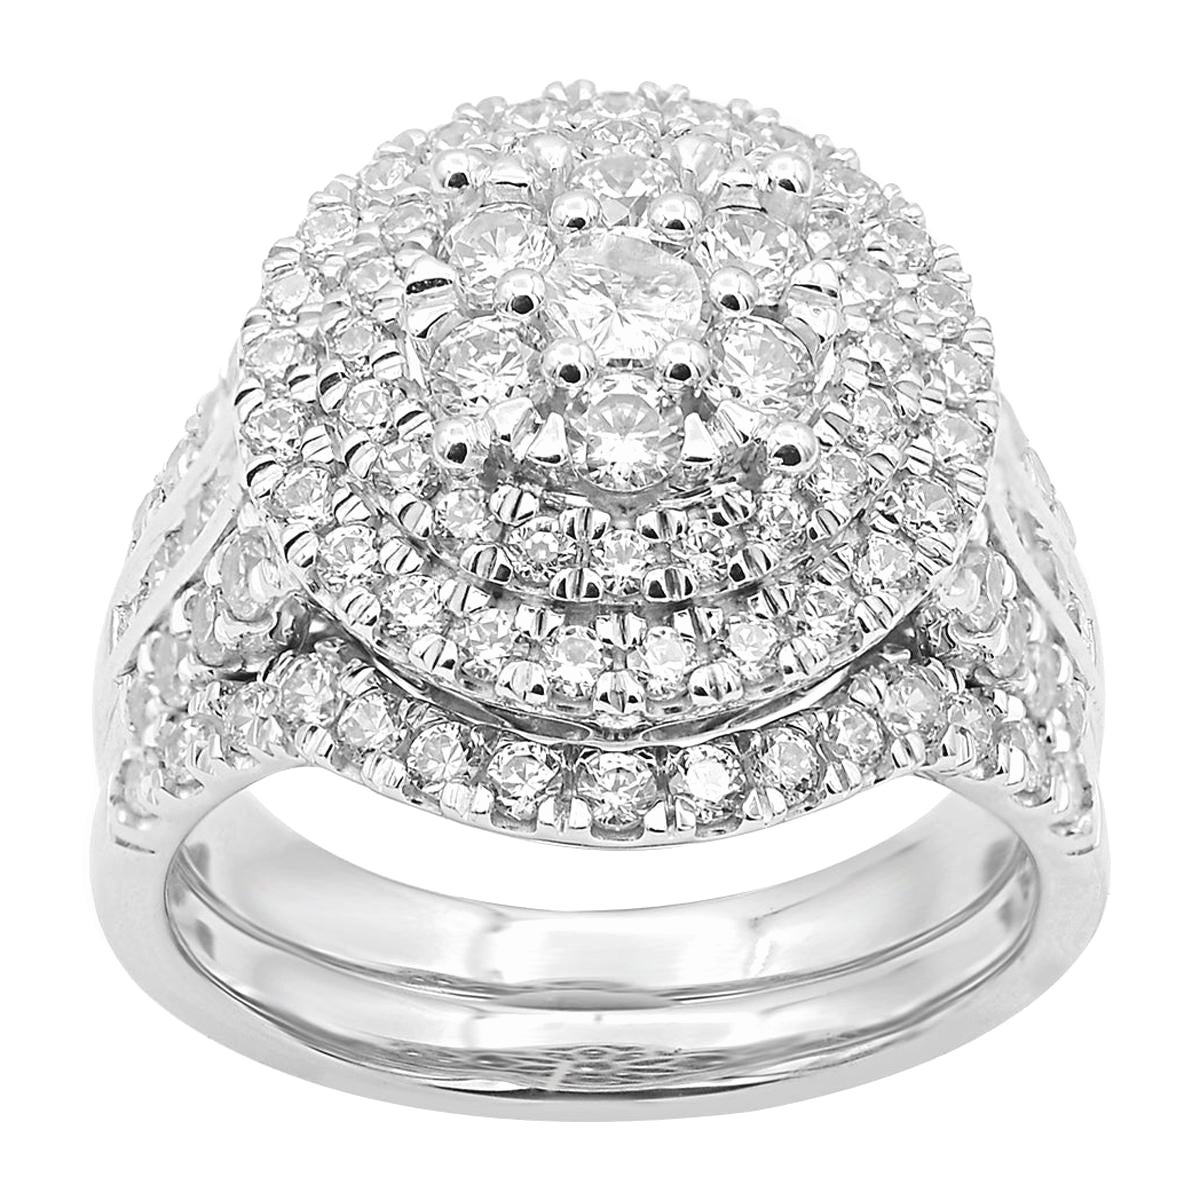 TJD 2.0 Carat Round Diamond 14K White Gold Double Halo Cluster Bridal Ring Set For Sale